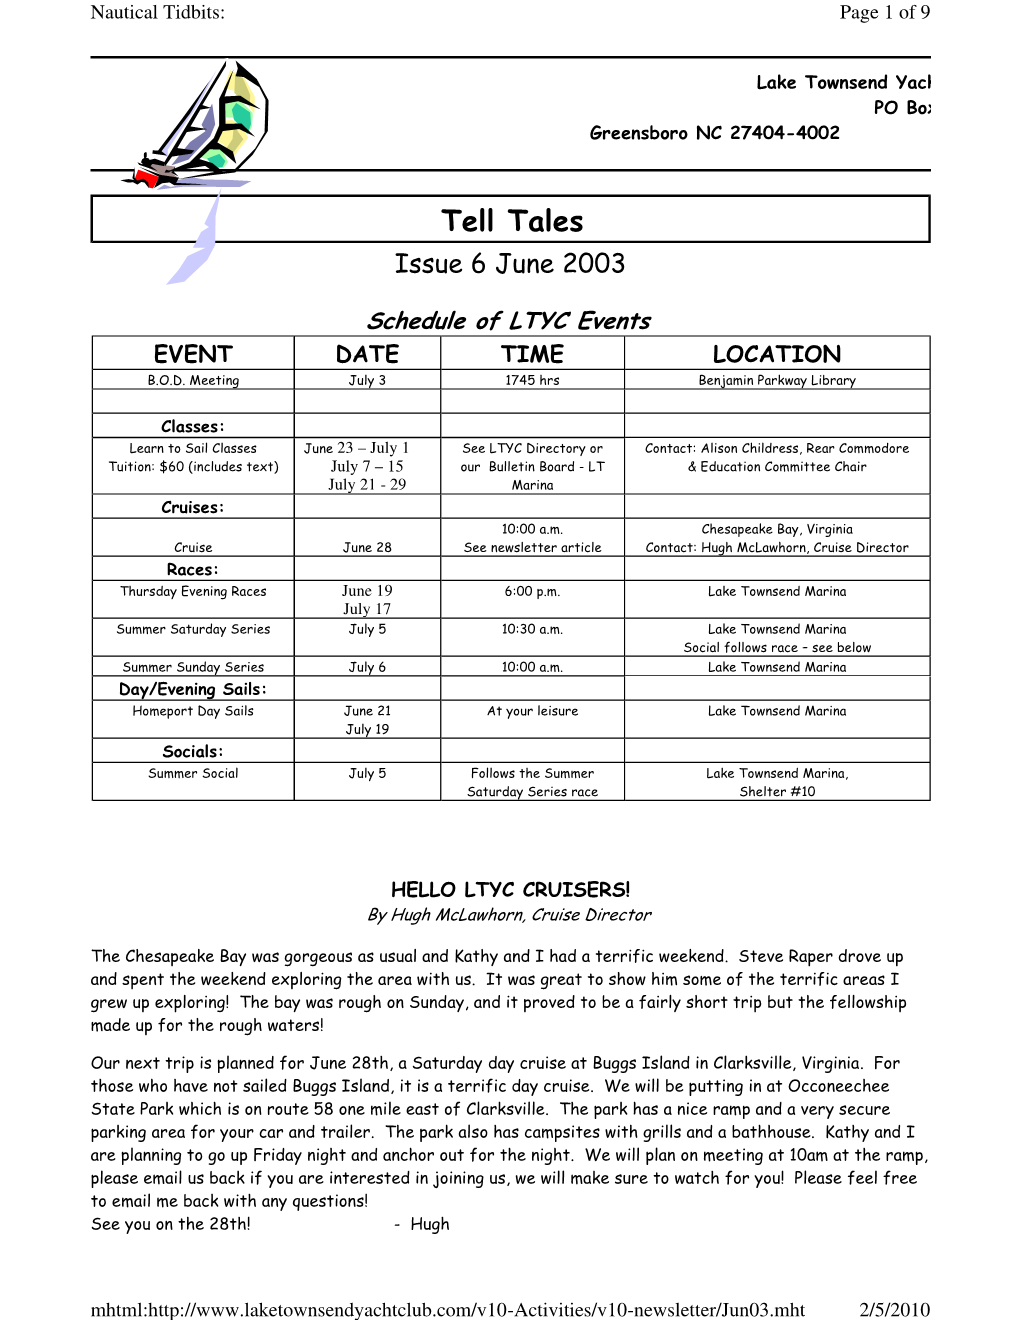 Tell Tales Issue 6 June 2003